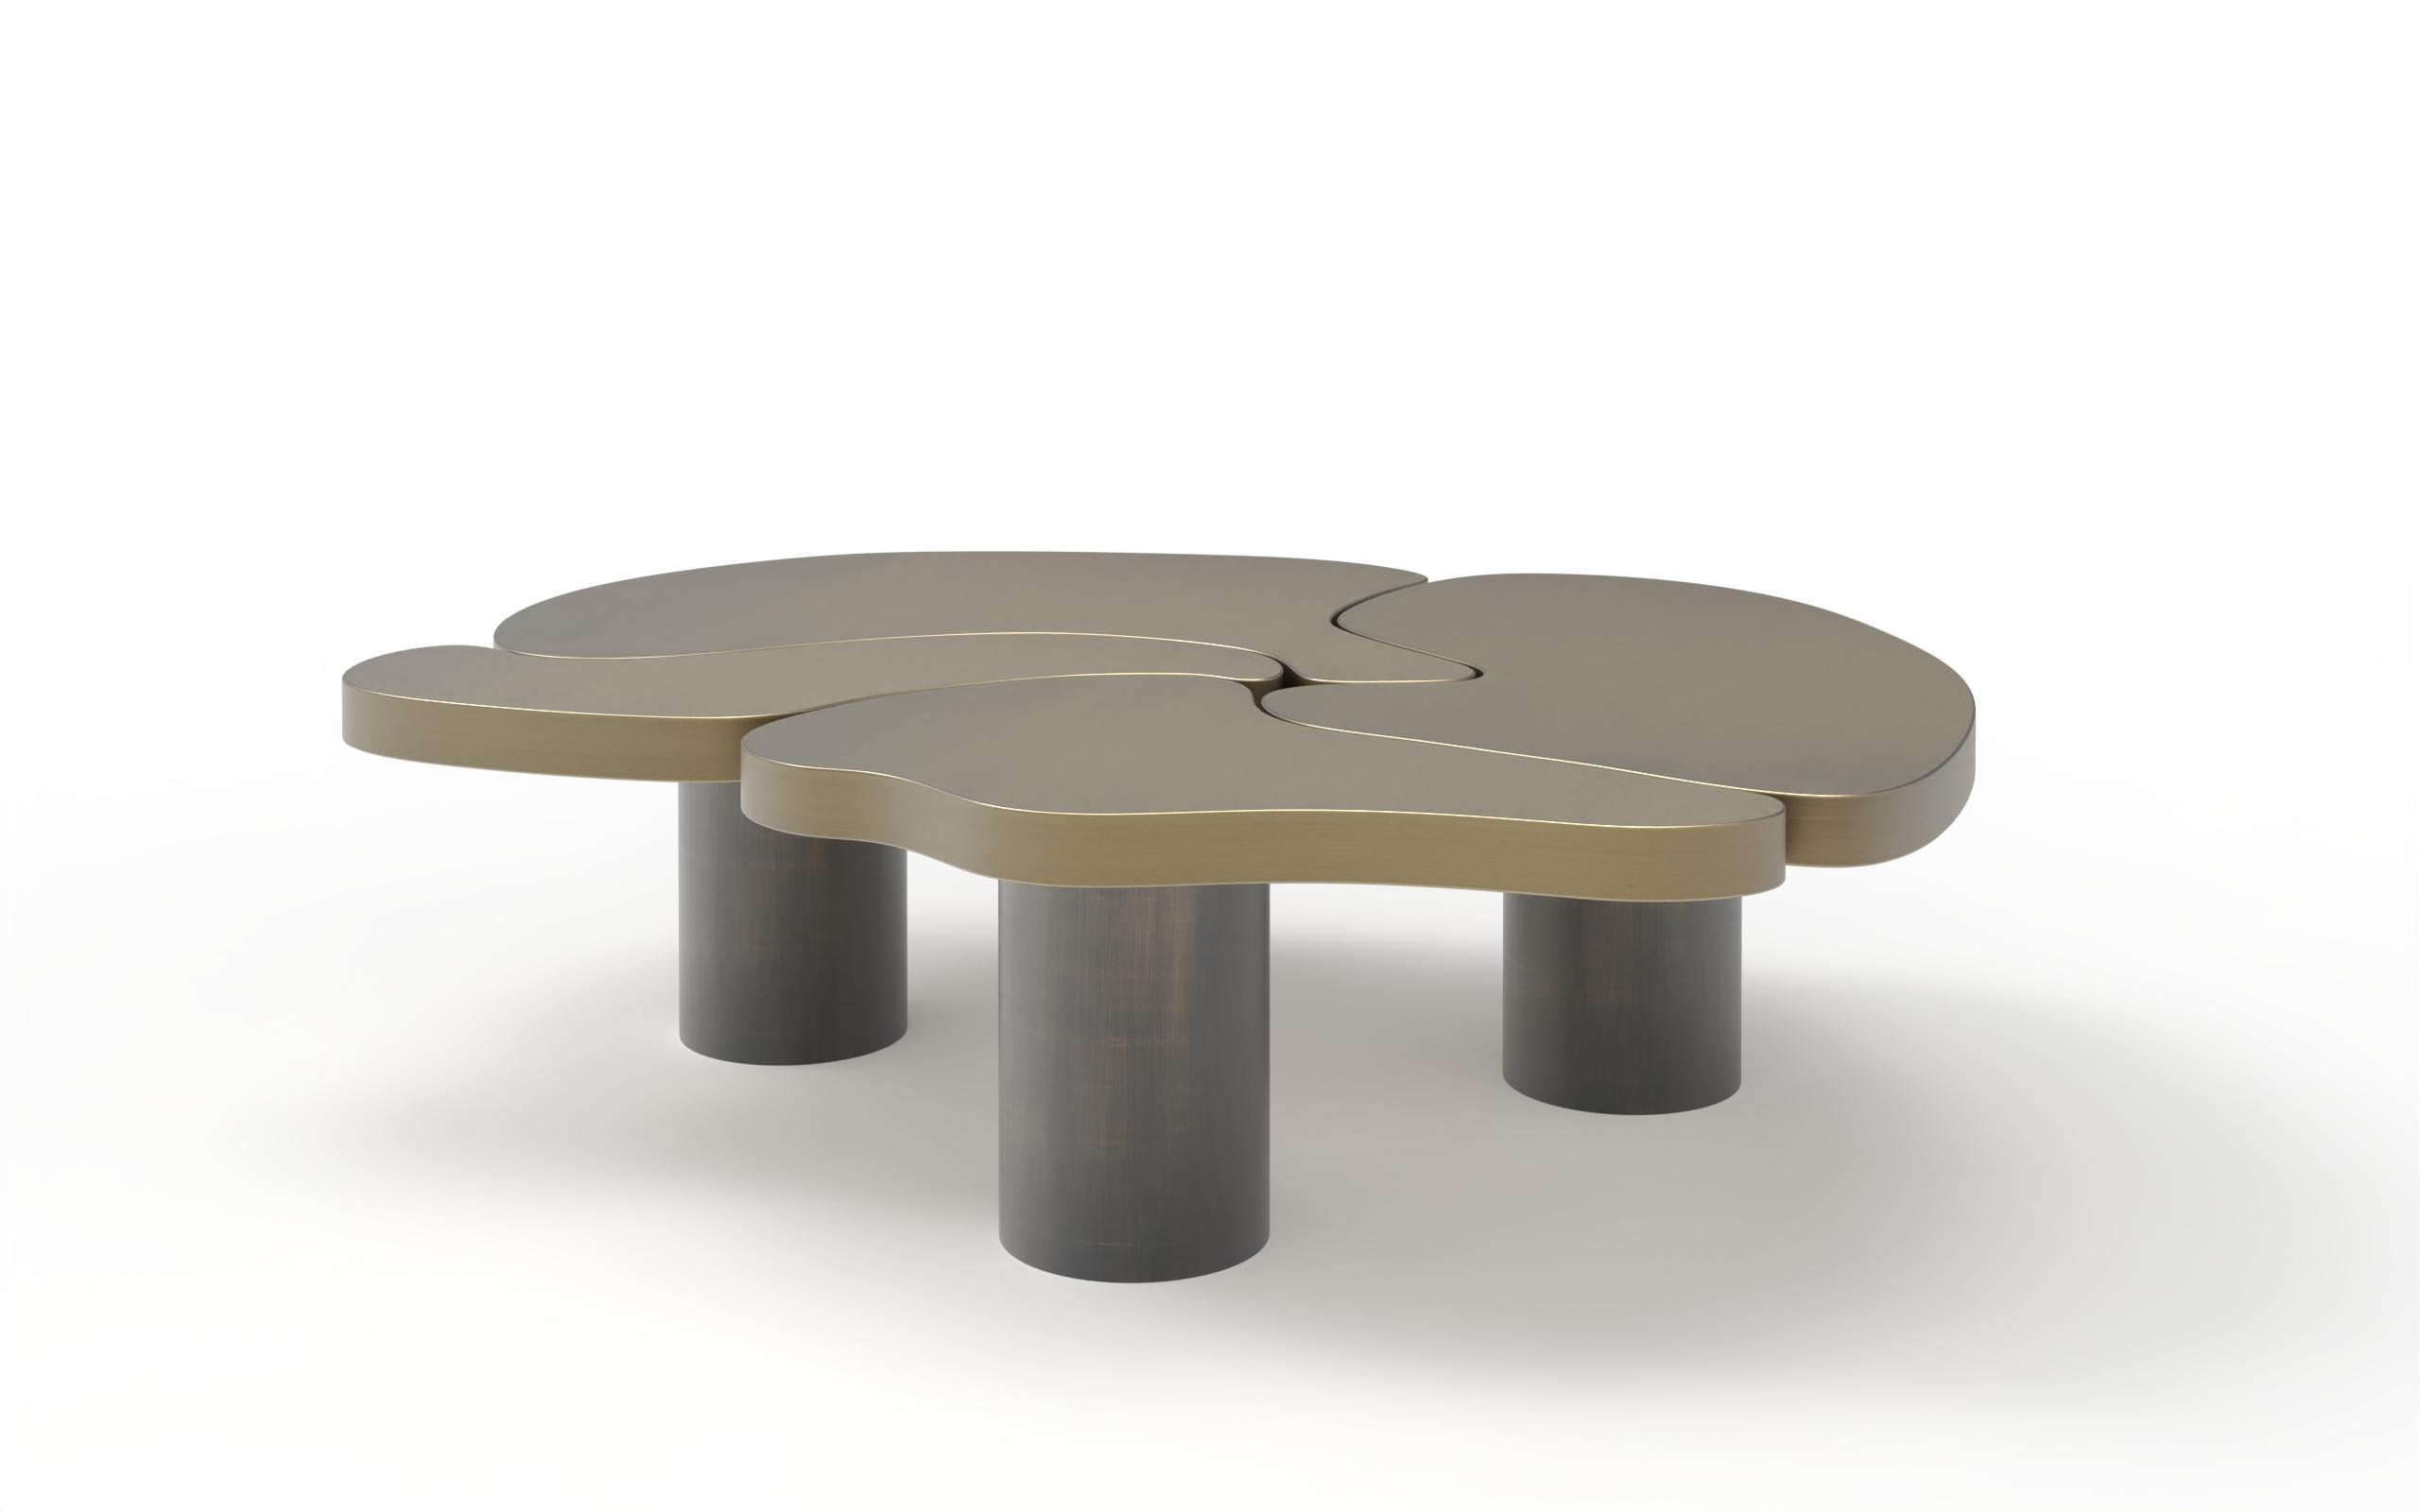 Enlace Coffee Table, Contemporary Collection, Handcrafted in Portugal - Europe by Greenapple.

The Enlace coffee table is inspired by the union of the four elements, each distinct yet complementing the others. Crafted from black brass and oxidized